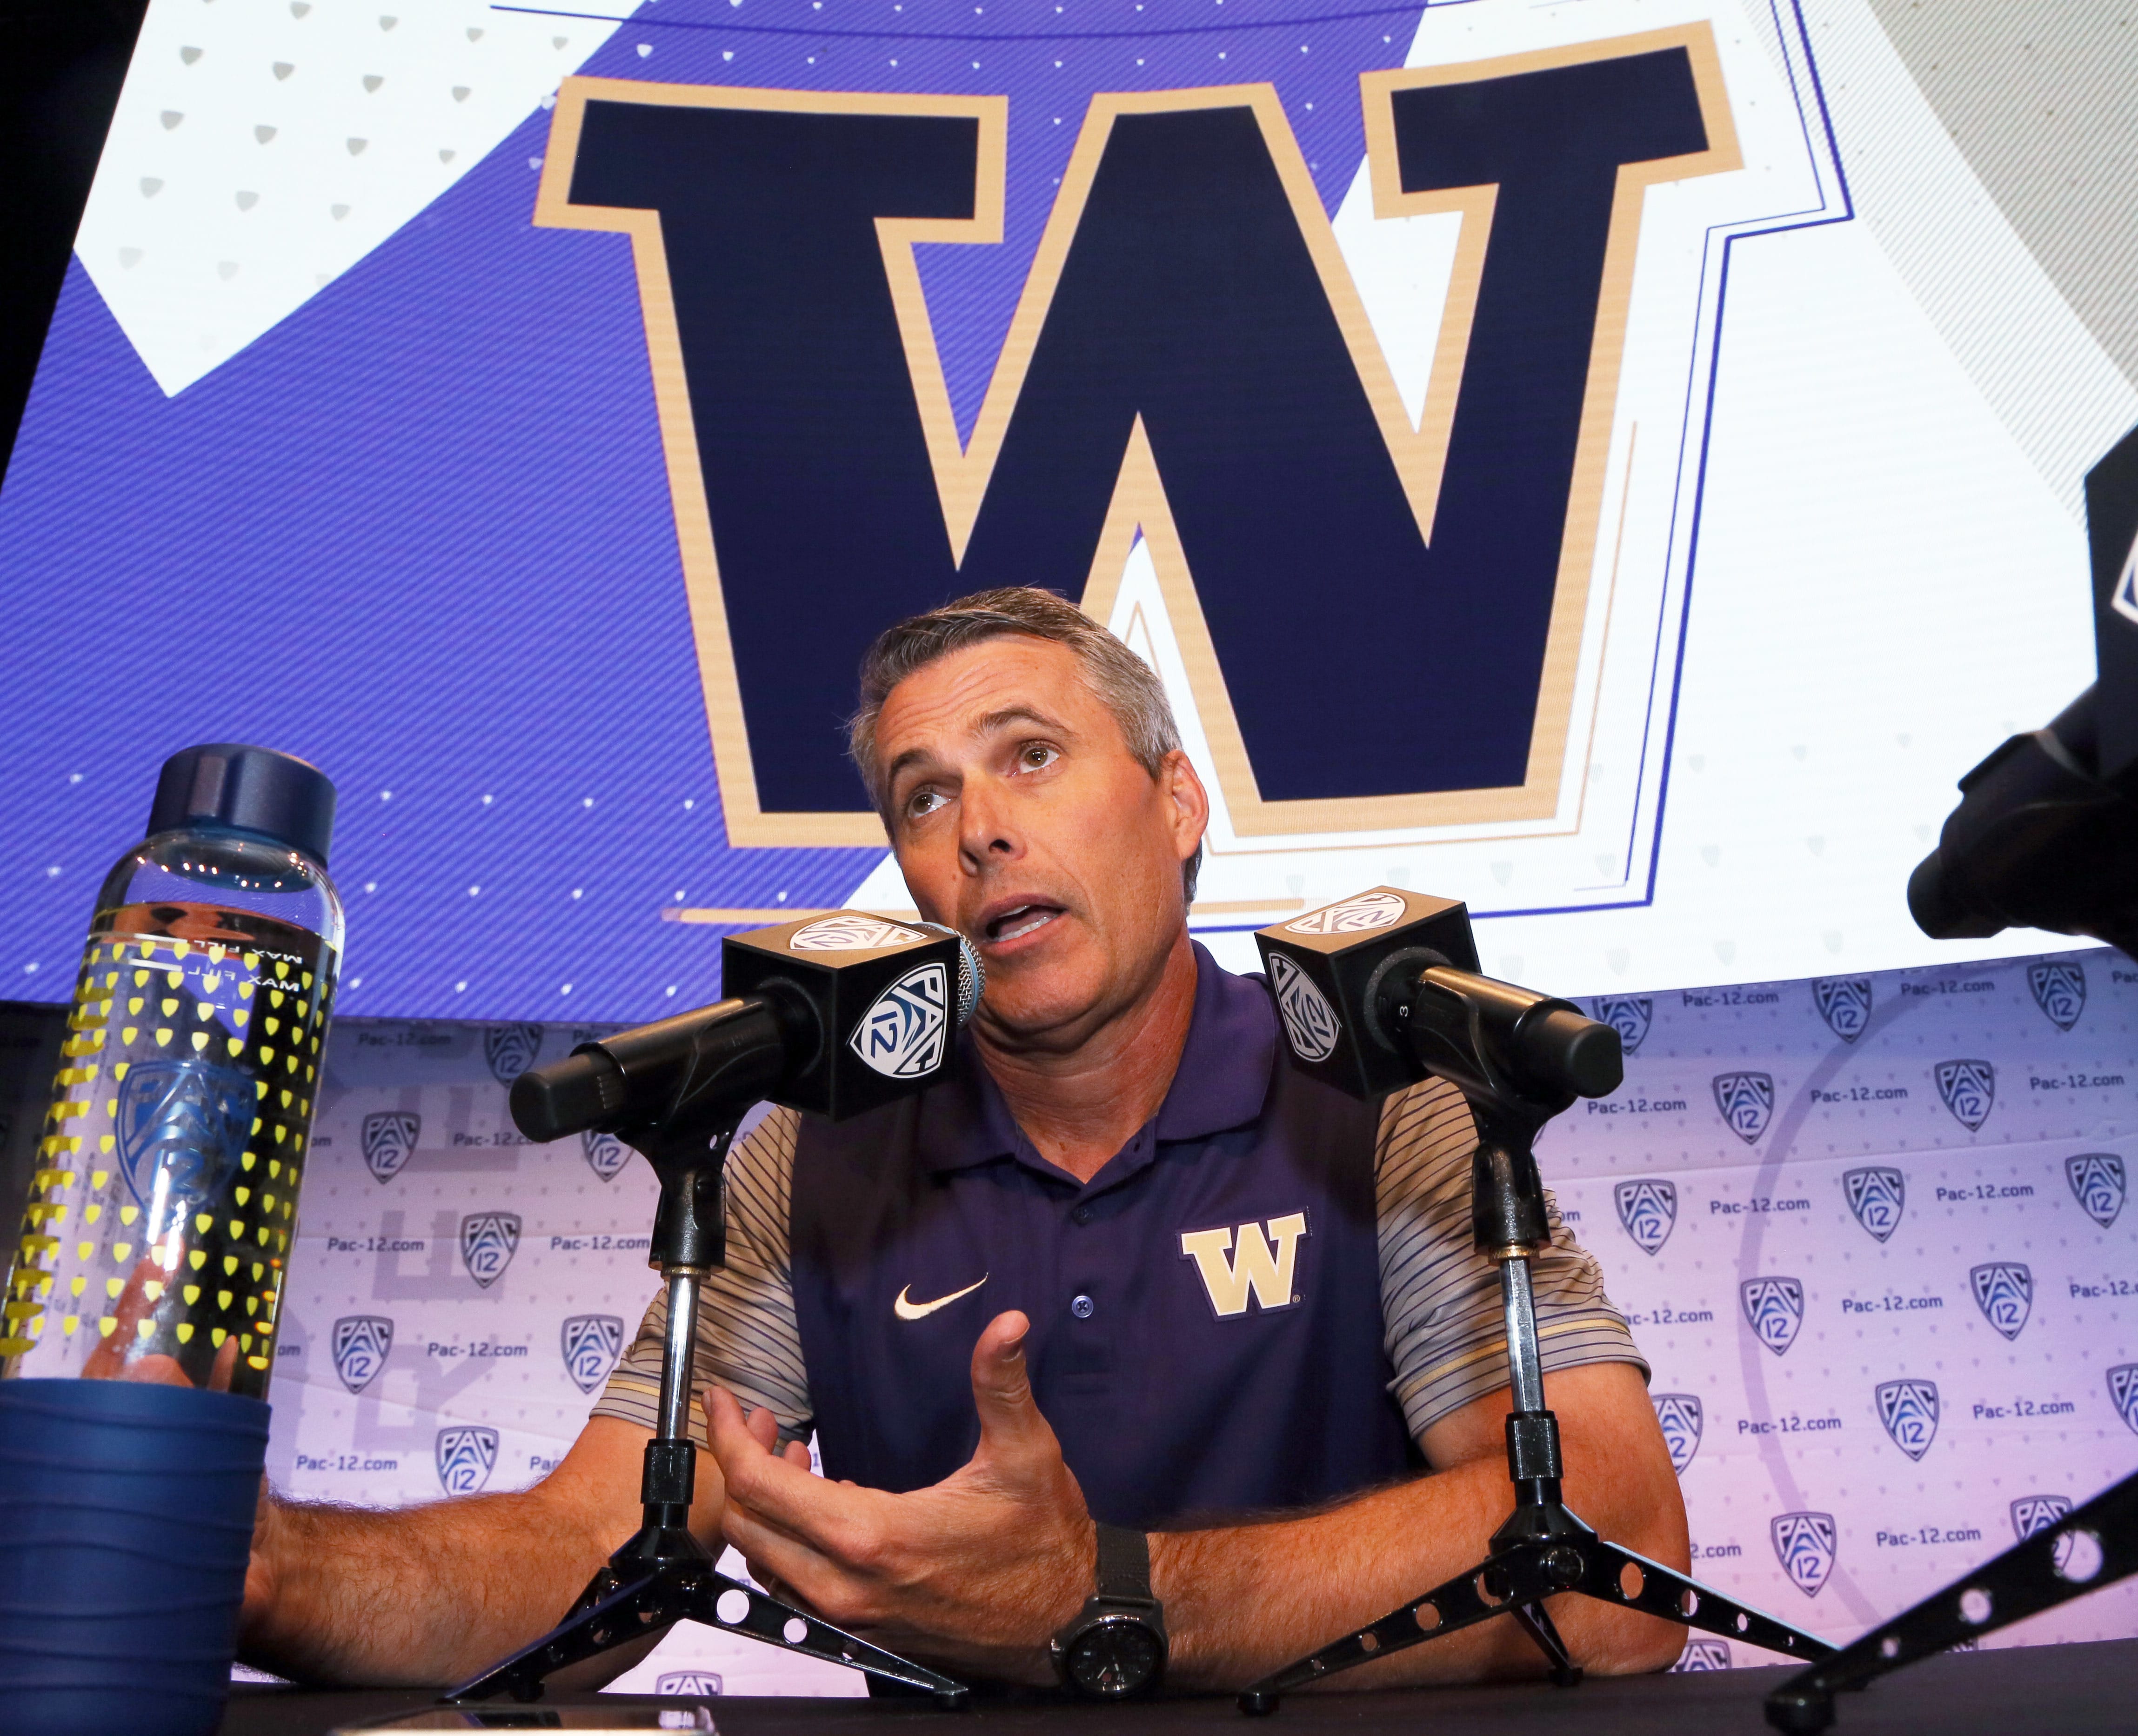 Washington head coach Chris Petersen speaks at the Pac-12 NCAA college football media day in Los Angeles on Friday, July 15, 2016.